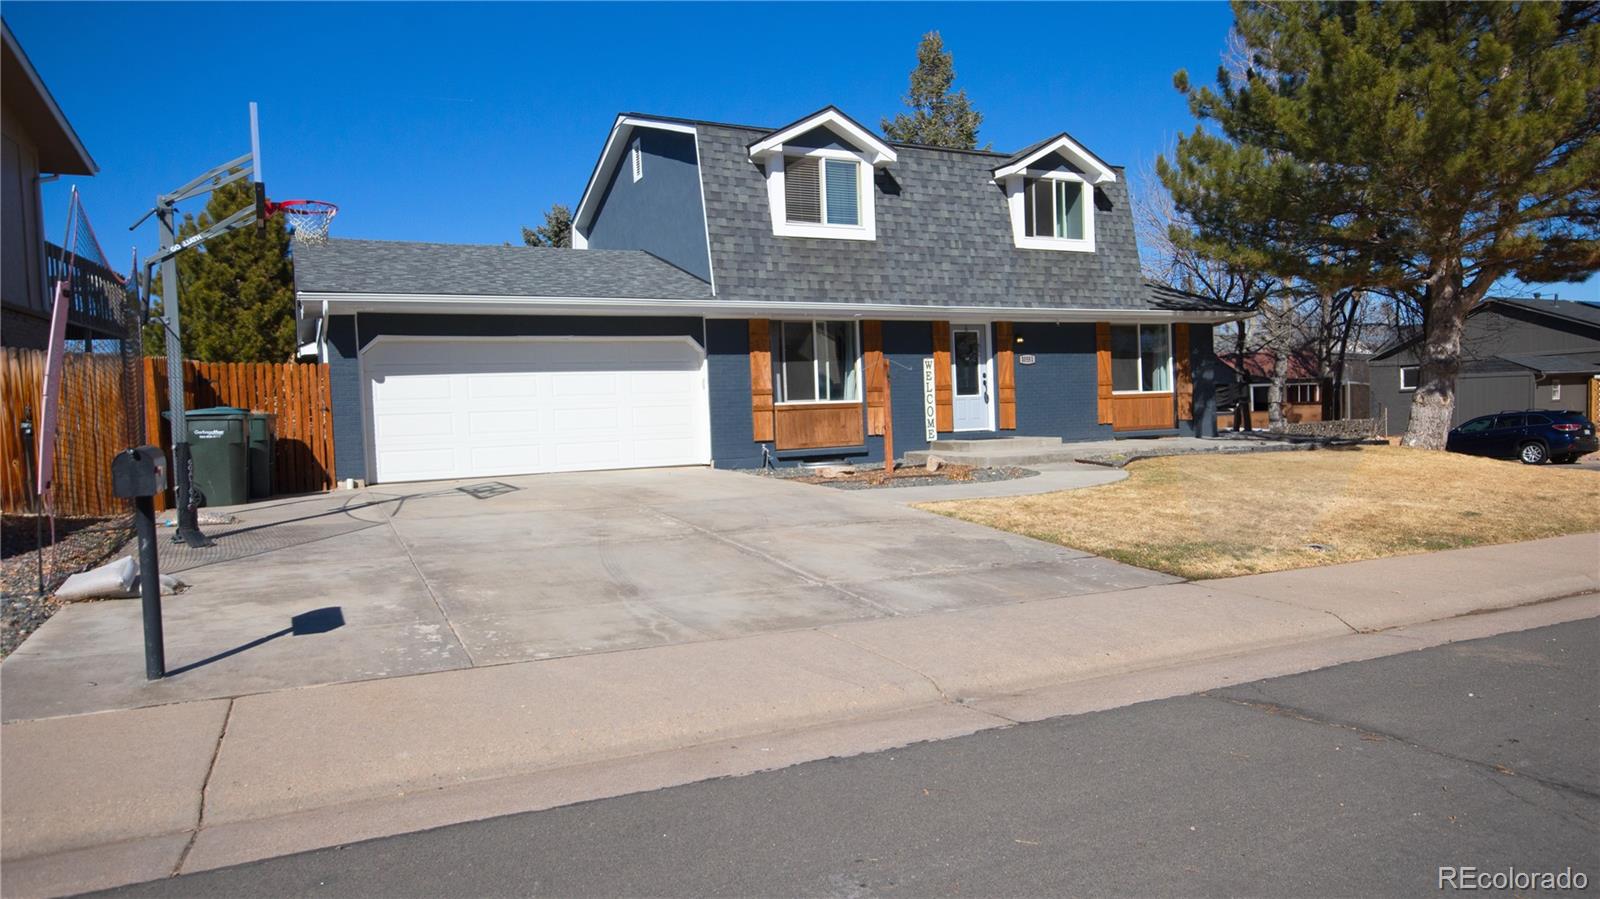 Report Image for 10551 W 101st Place,Westminster, Colorado